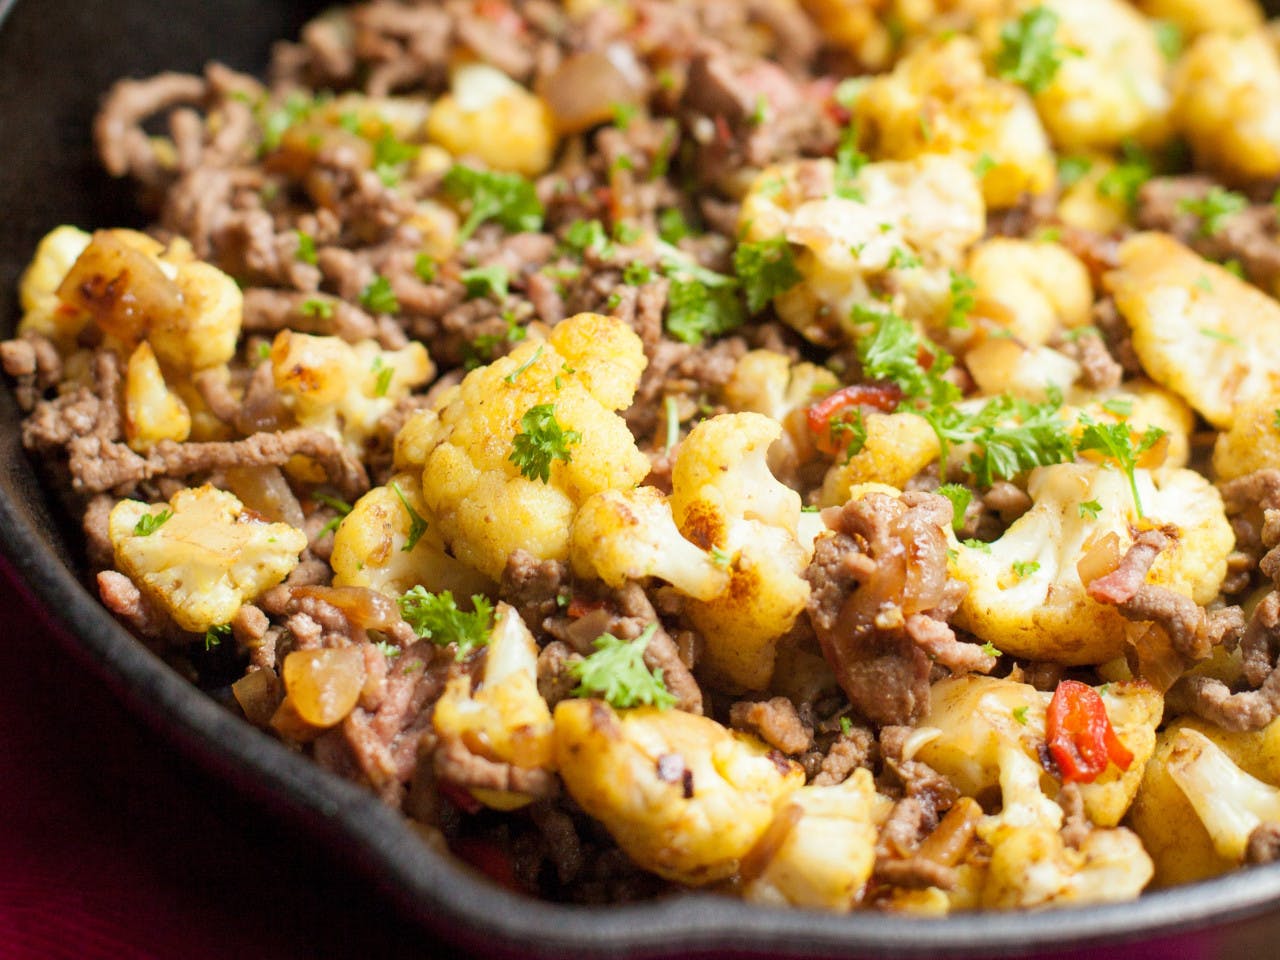 Minced meat dish with cauliflower